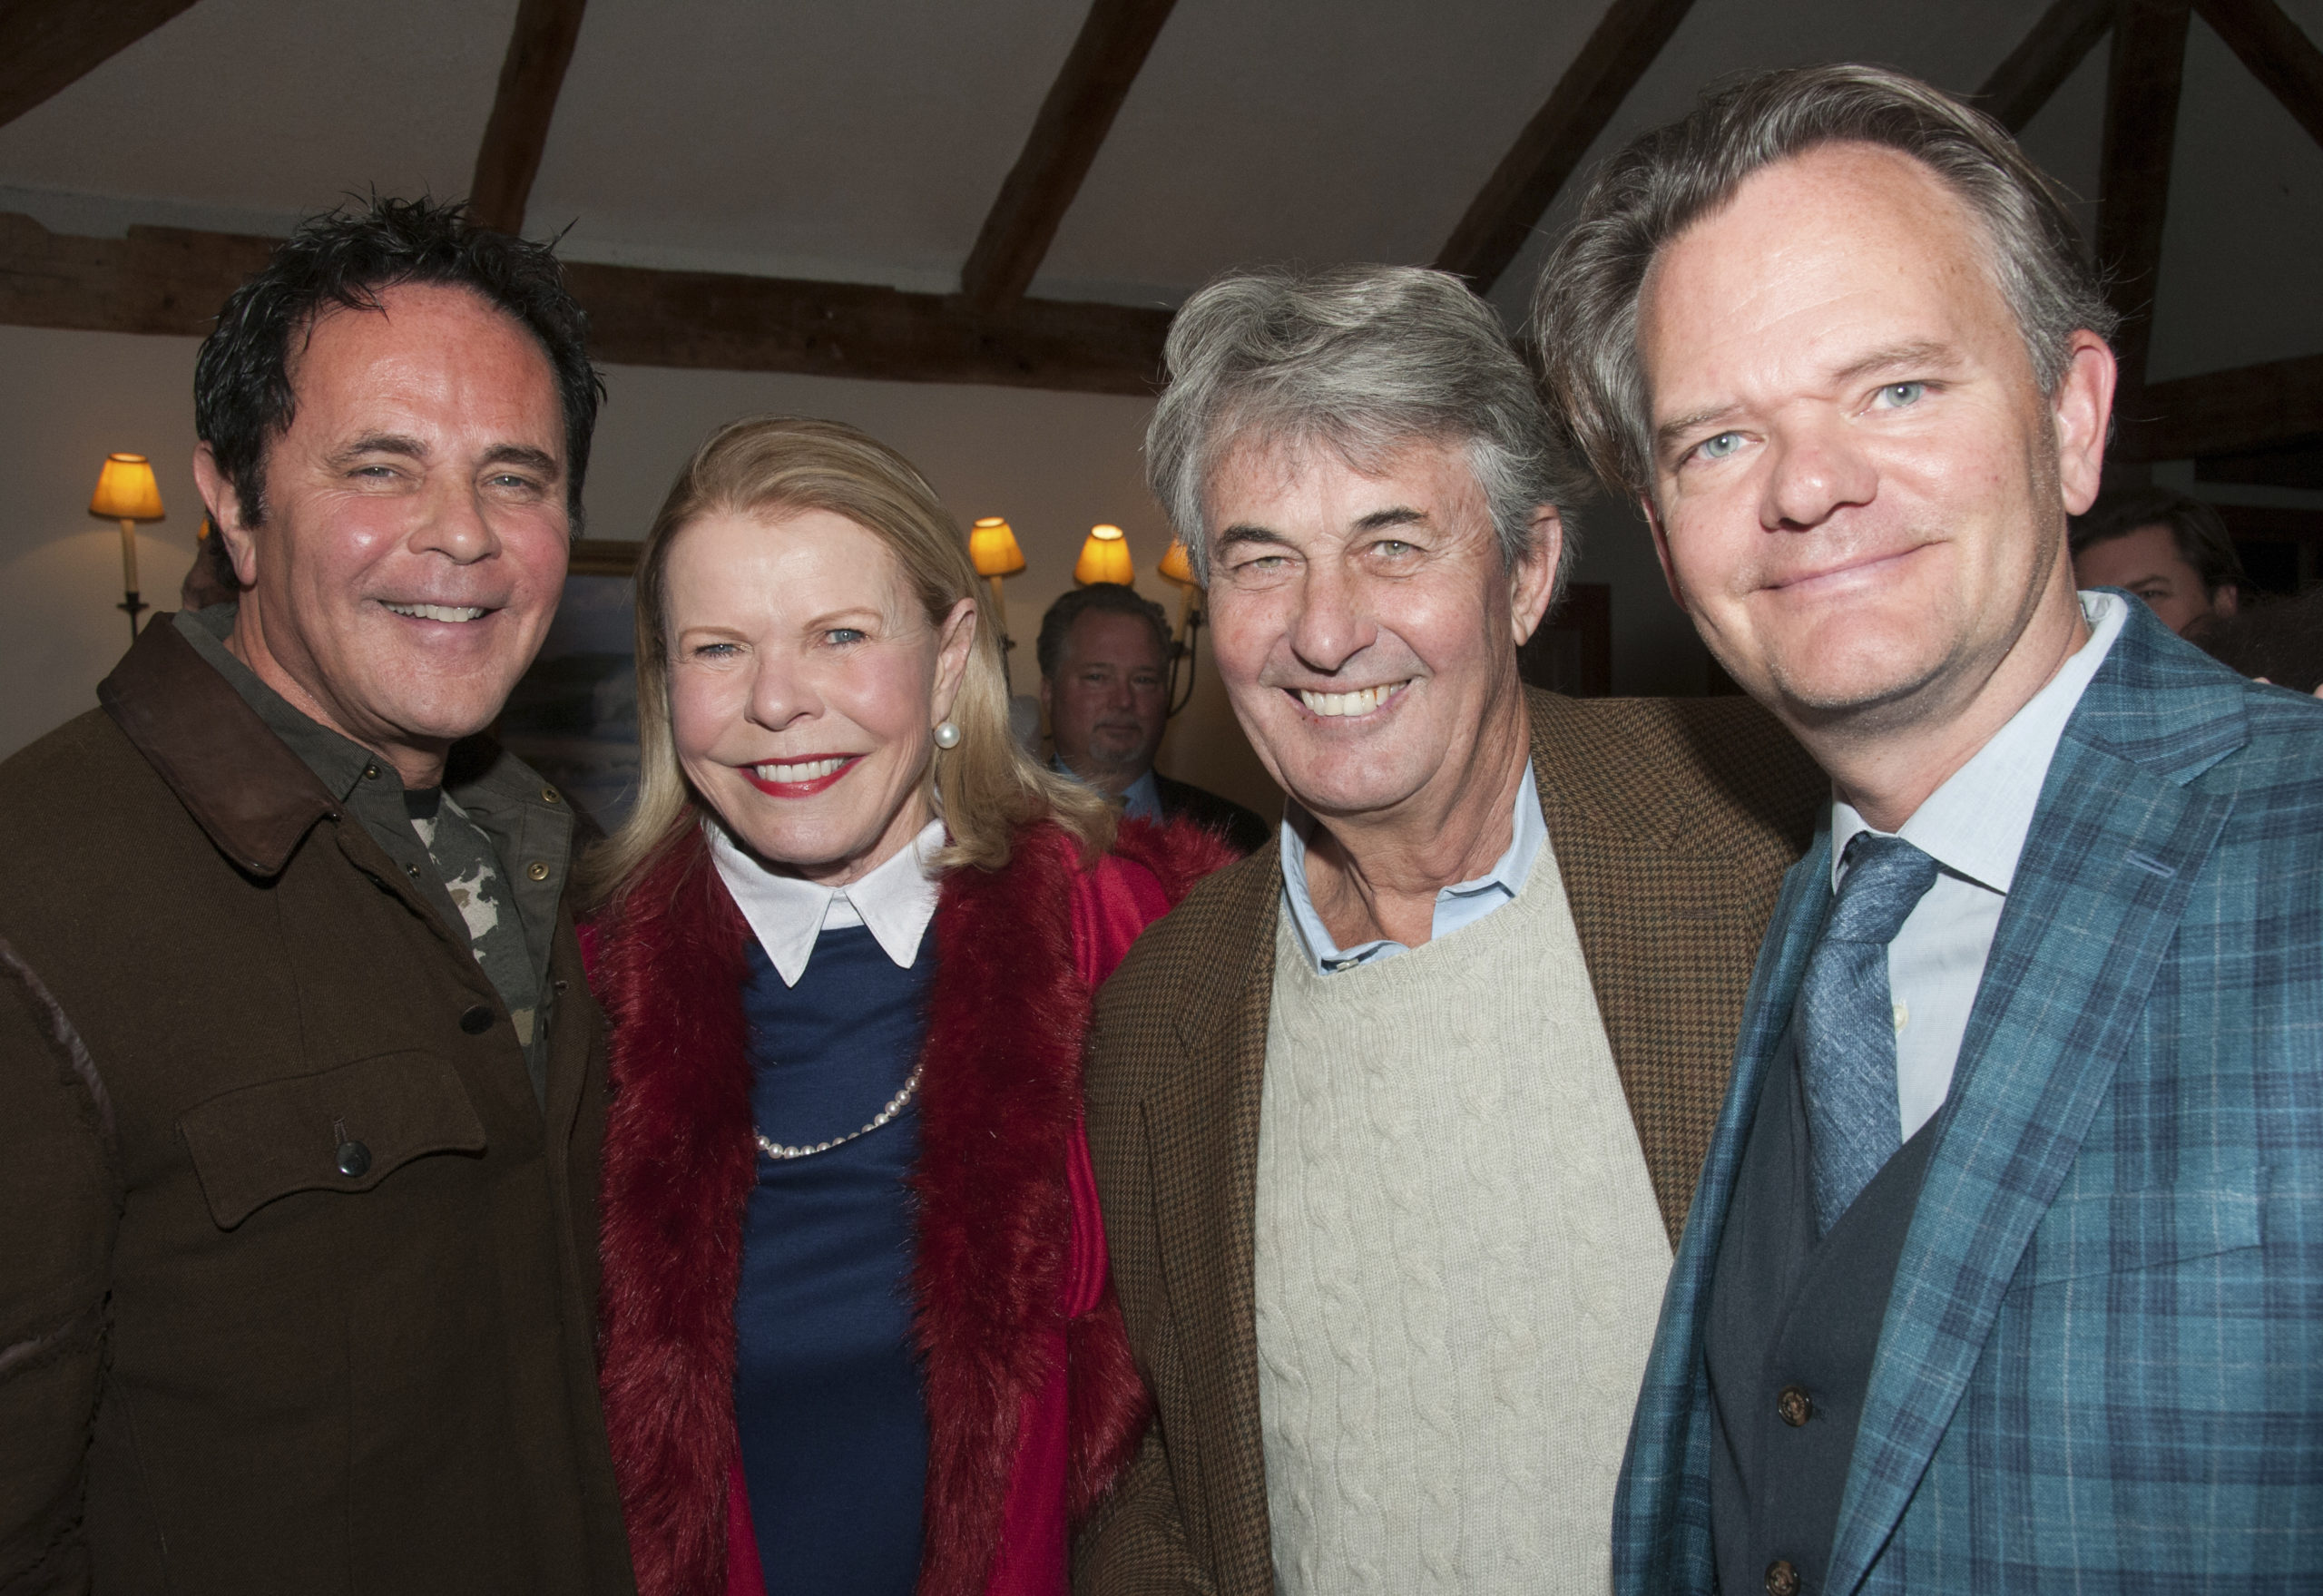 Tony Ingrao, Dale Ellen Leff, Michael Garsten and Nick Martin at  the kick-off cocktail party for the annaul East Hampton House & Garden Tour, now in its 35th year, to benefit the East Hampton Historical Society, on Friday evening at the Maidstone Club.   RICHARD LEWIN